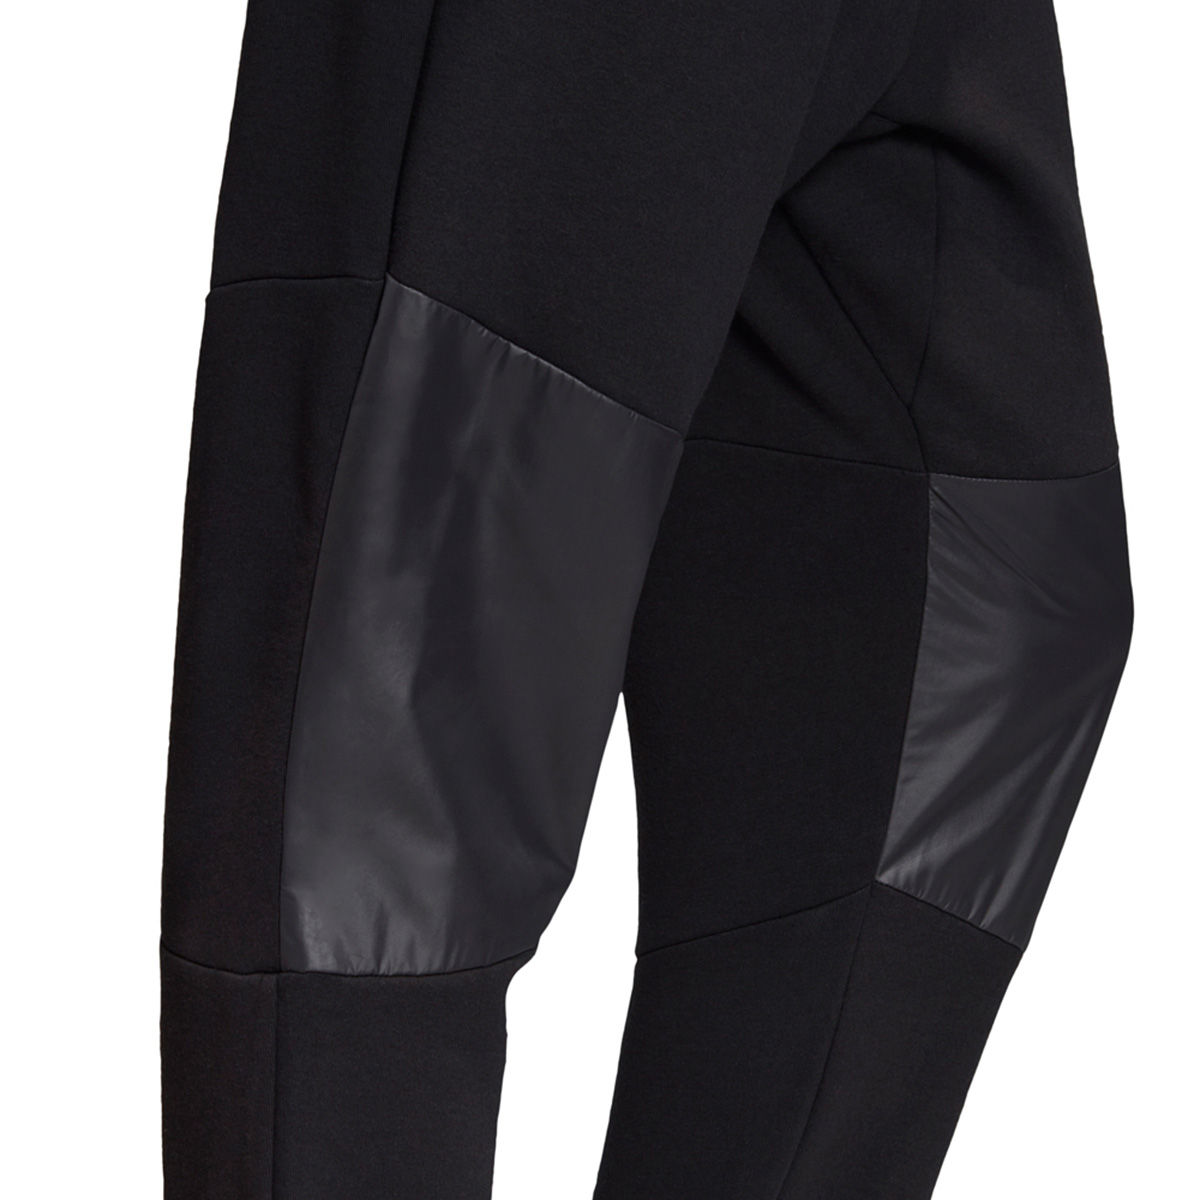 adidas Tech Reflective Track Pants  Black  Mens  Compare  Union Square  Aberdeen Shopping Centre